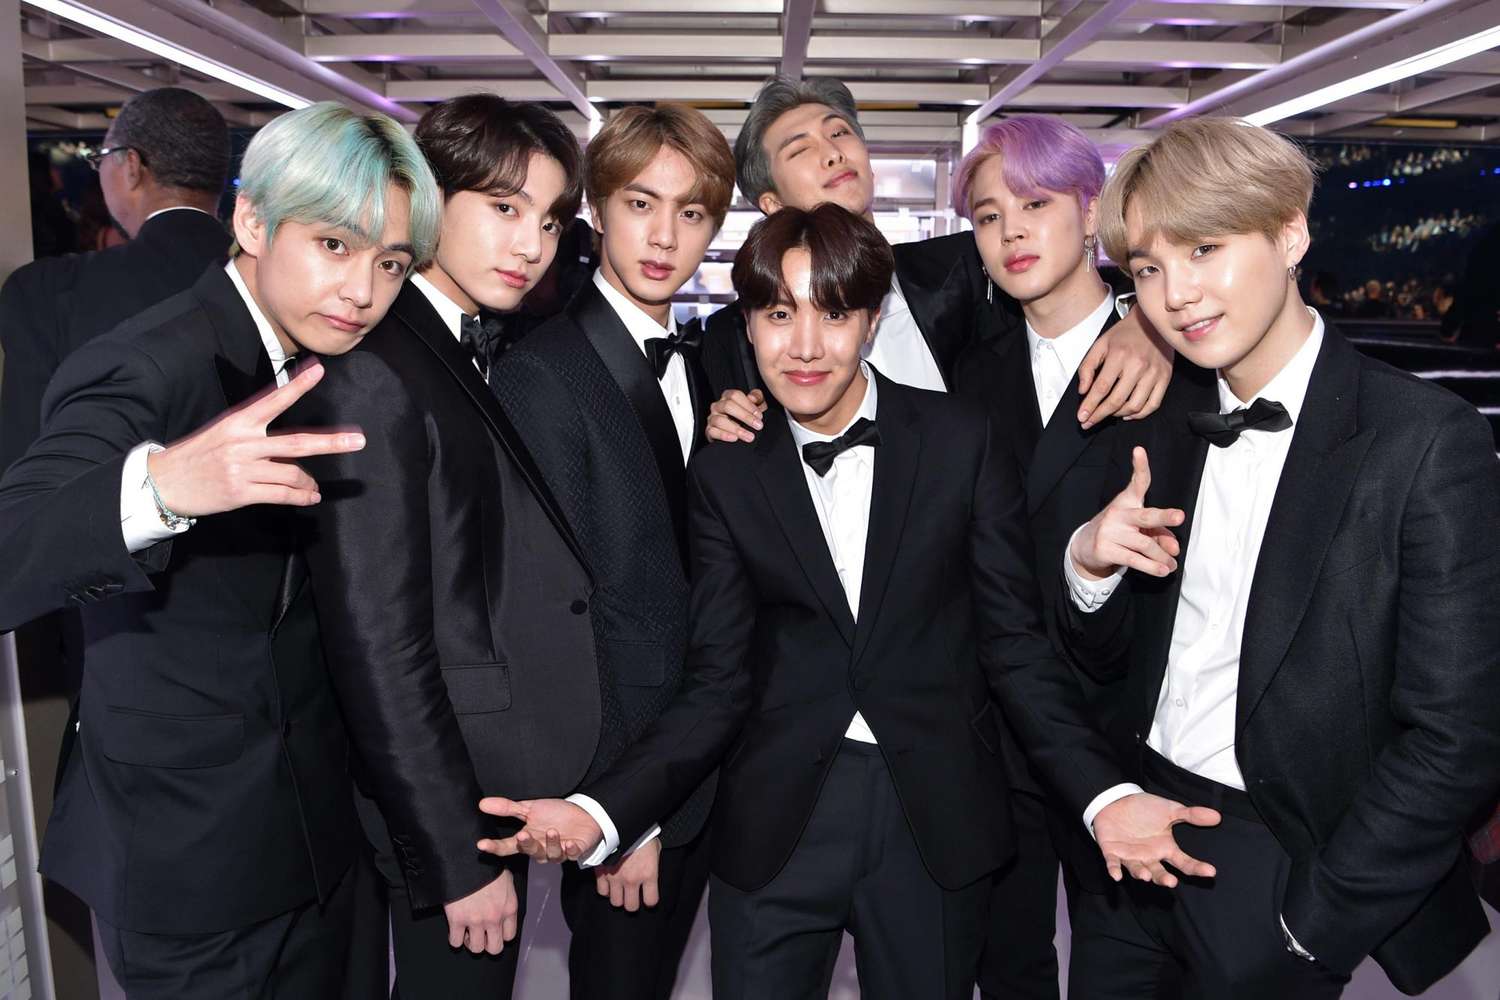 In 2019, BTS received their first Grammy nomination for Best Recording Package for their album "Love Yourself: Tear." While they didn't win, the nomination was a historic moment for BTS and the K-pop genre, earning them recognition on a prestigious international platform.]]>